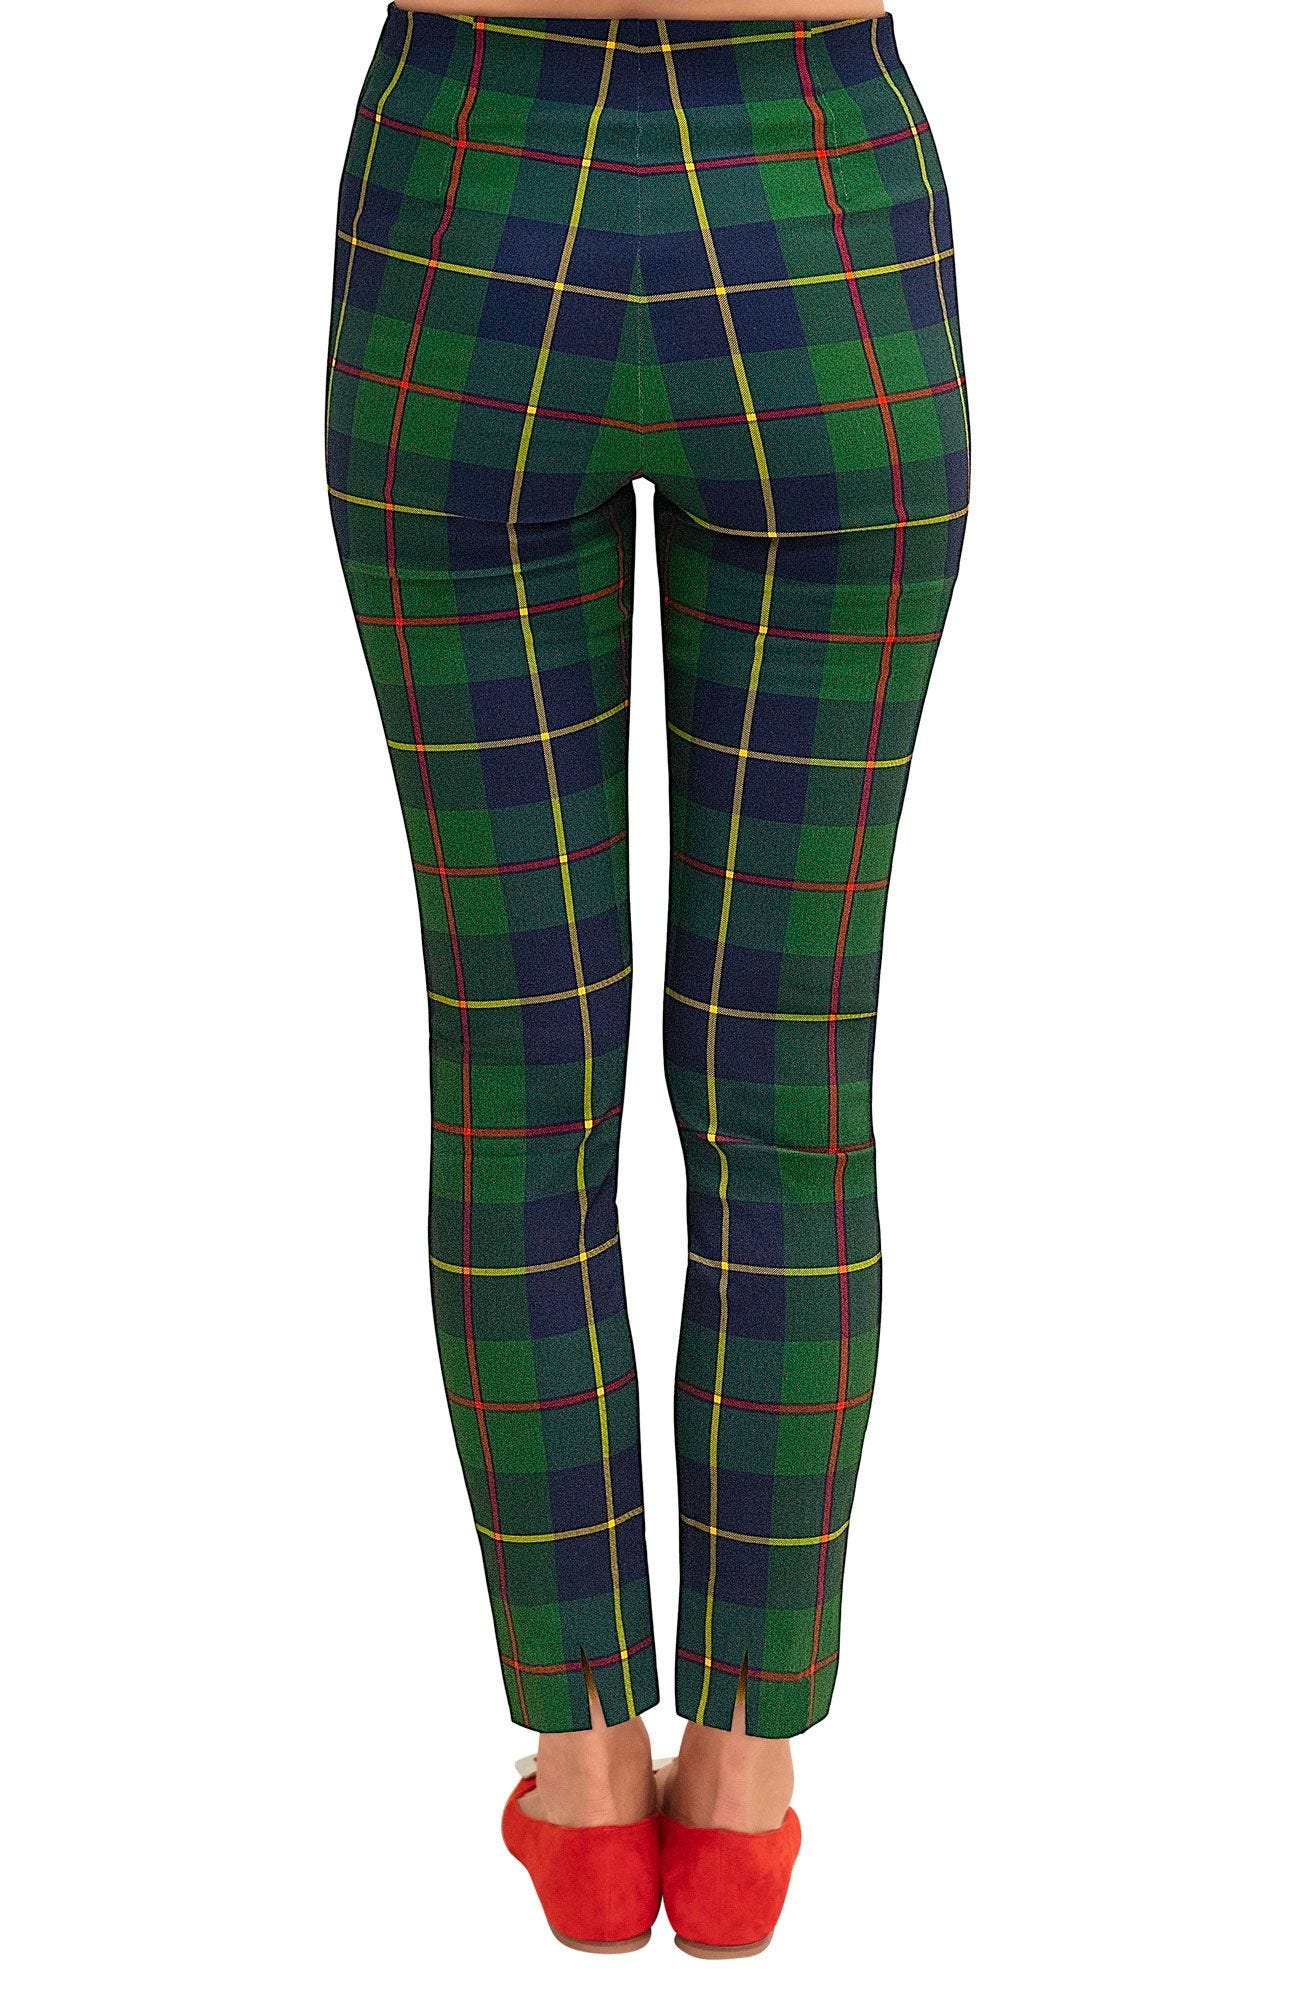 Gretchen Scott - Plaidly Cooper Classic Green Multi Pull On Pant